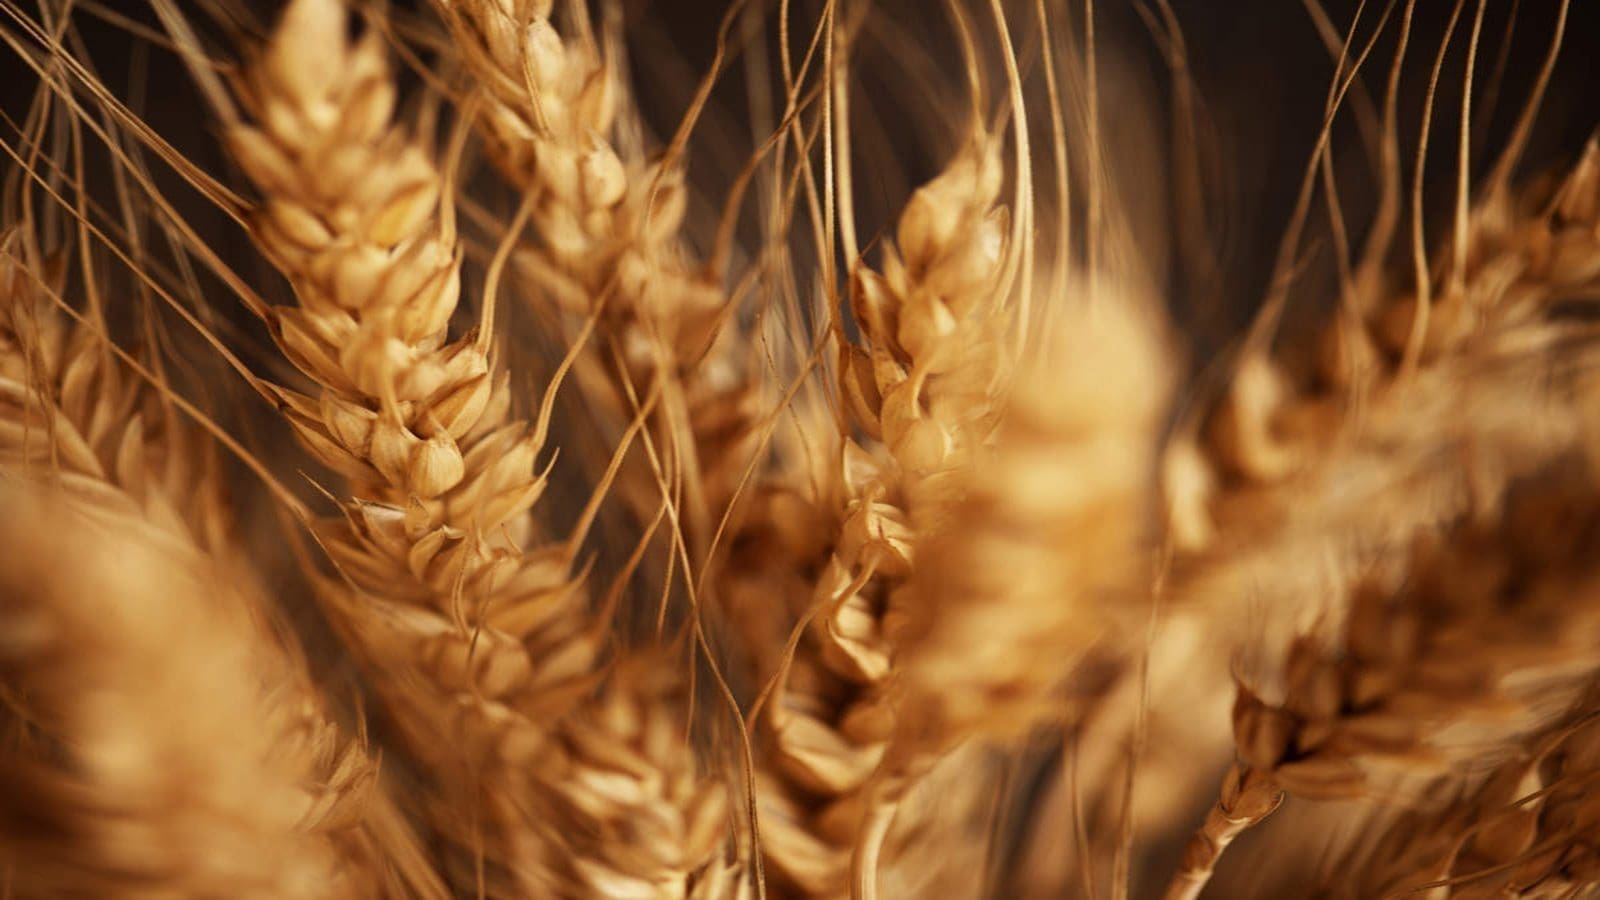 Canada imports Australian barley to make up for deficit incurred from last year’s drought